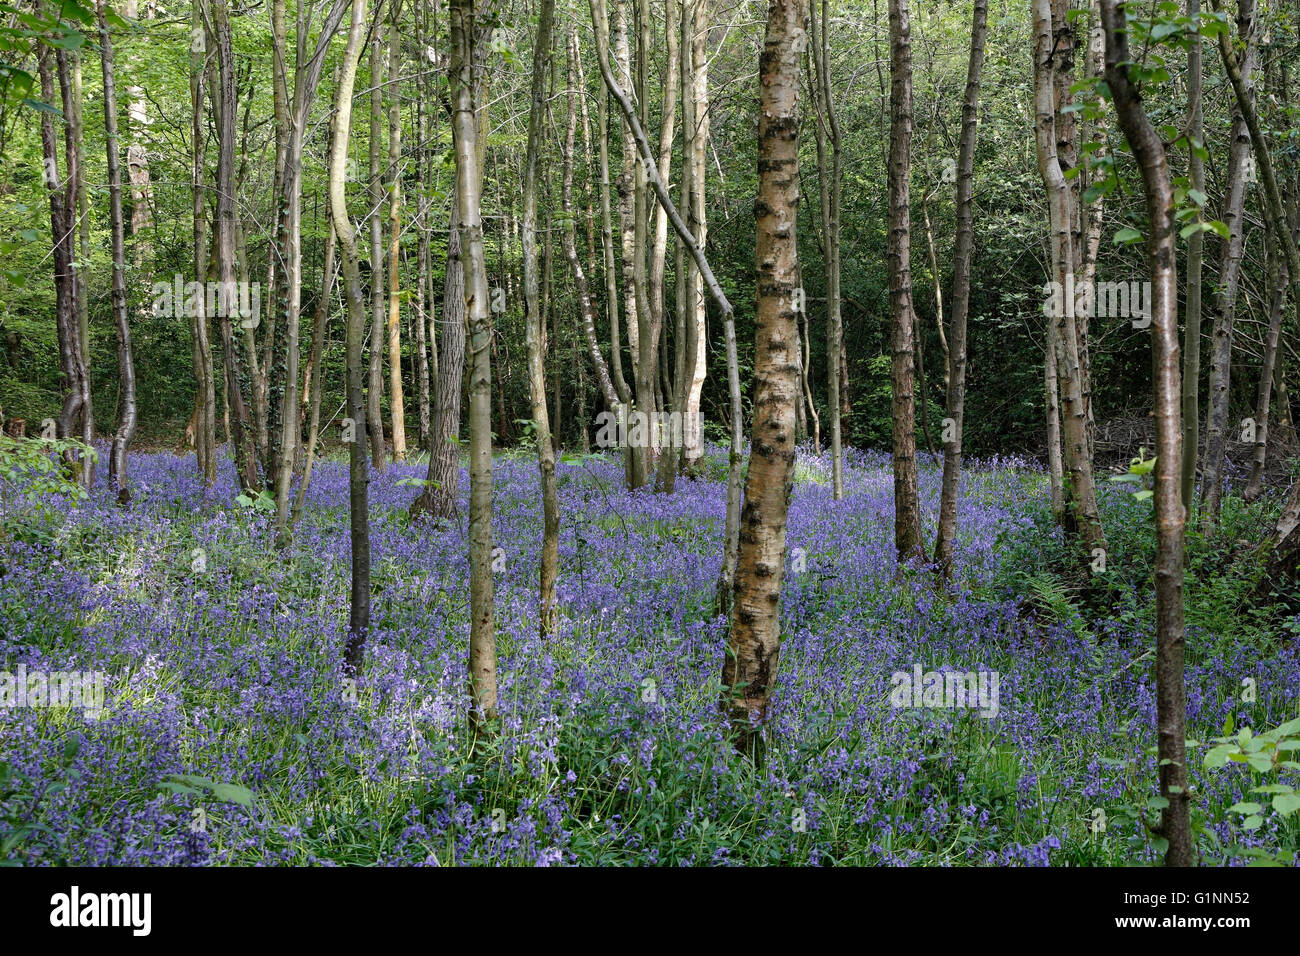 Bluebells growing in Ecclesall Woods Sheffield England. Suburban ancient woodland biodiversity Stock Photo